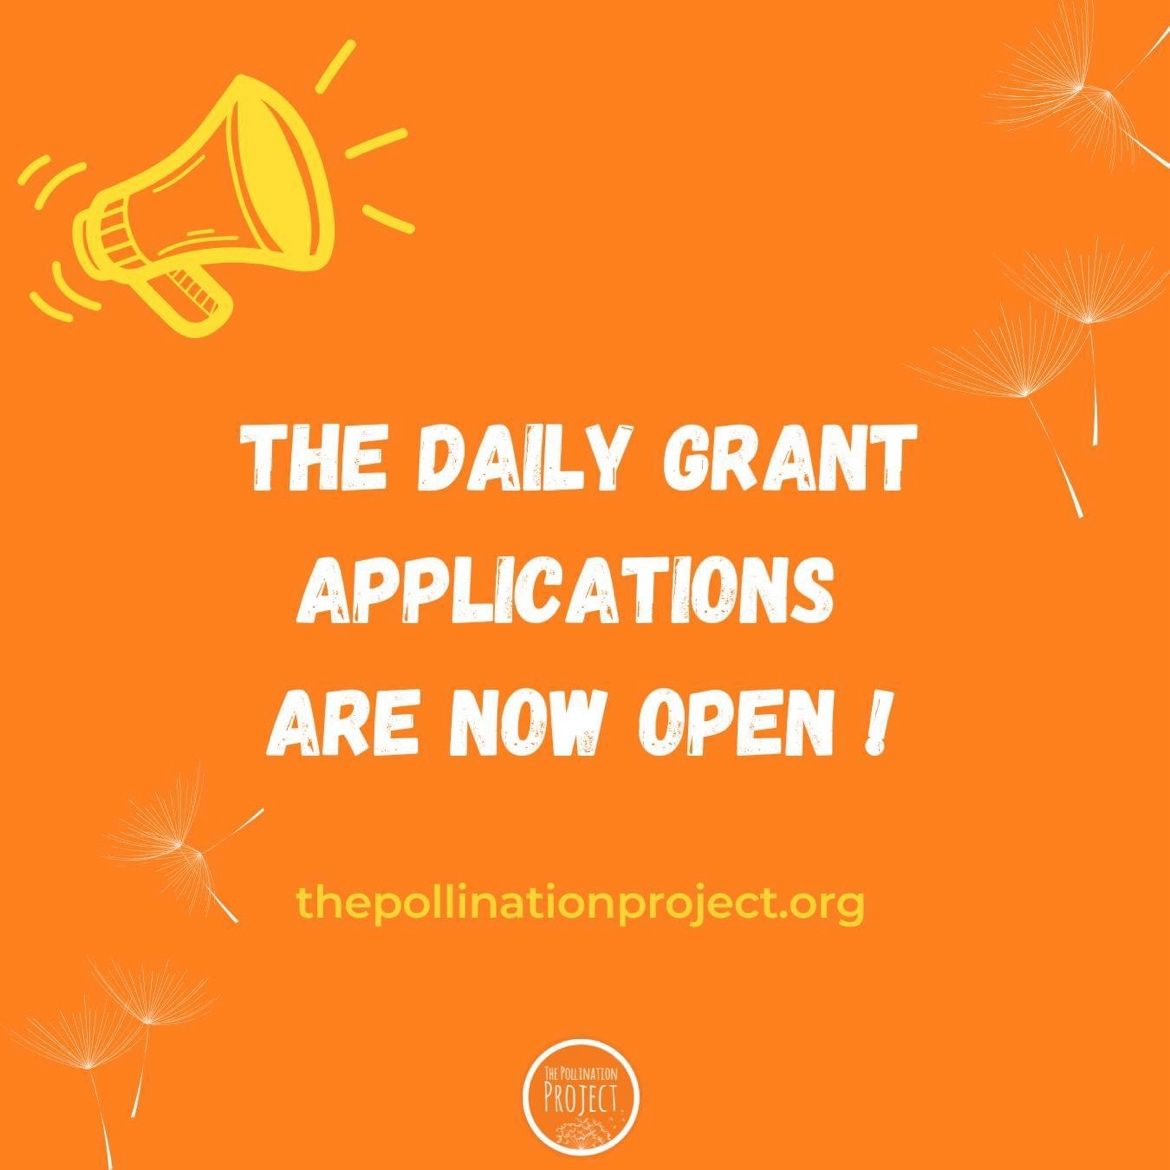 🌍 Ready to make a difference? Join us and access our $1,000 Daily Grant! Seed funding, global impact, and connections with changemakers await.
Open to all nationalities.
📅 Rolling deadline.
📝 Apply now: shorturl.at/vS289

#Grants #SeedFunding #ApplyNow #GlobalImpact